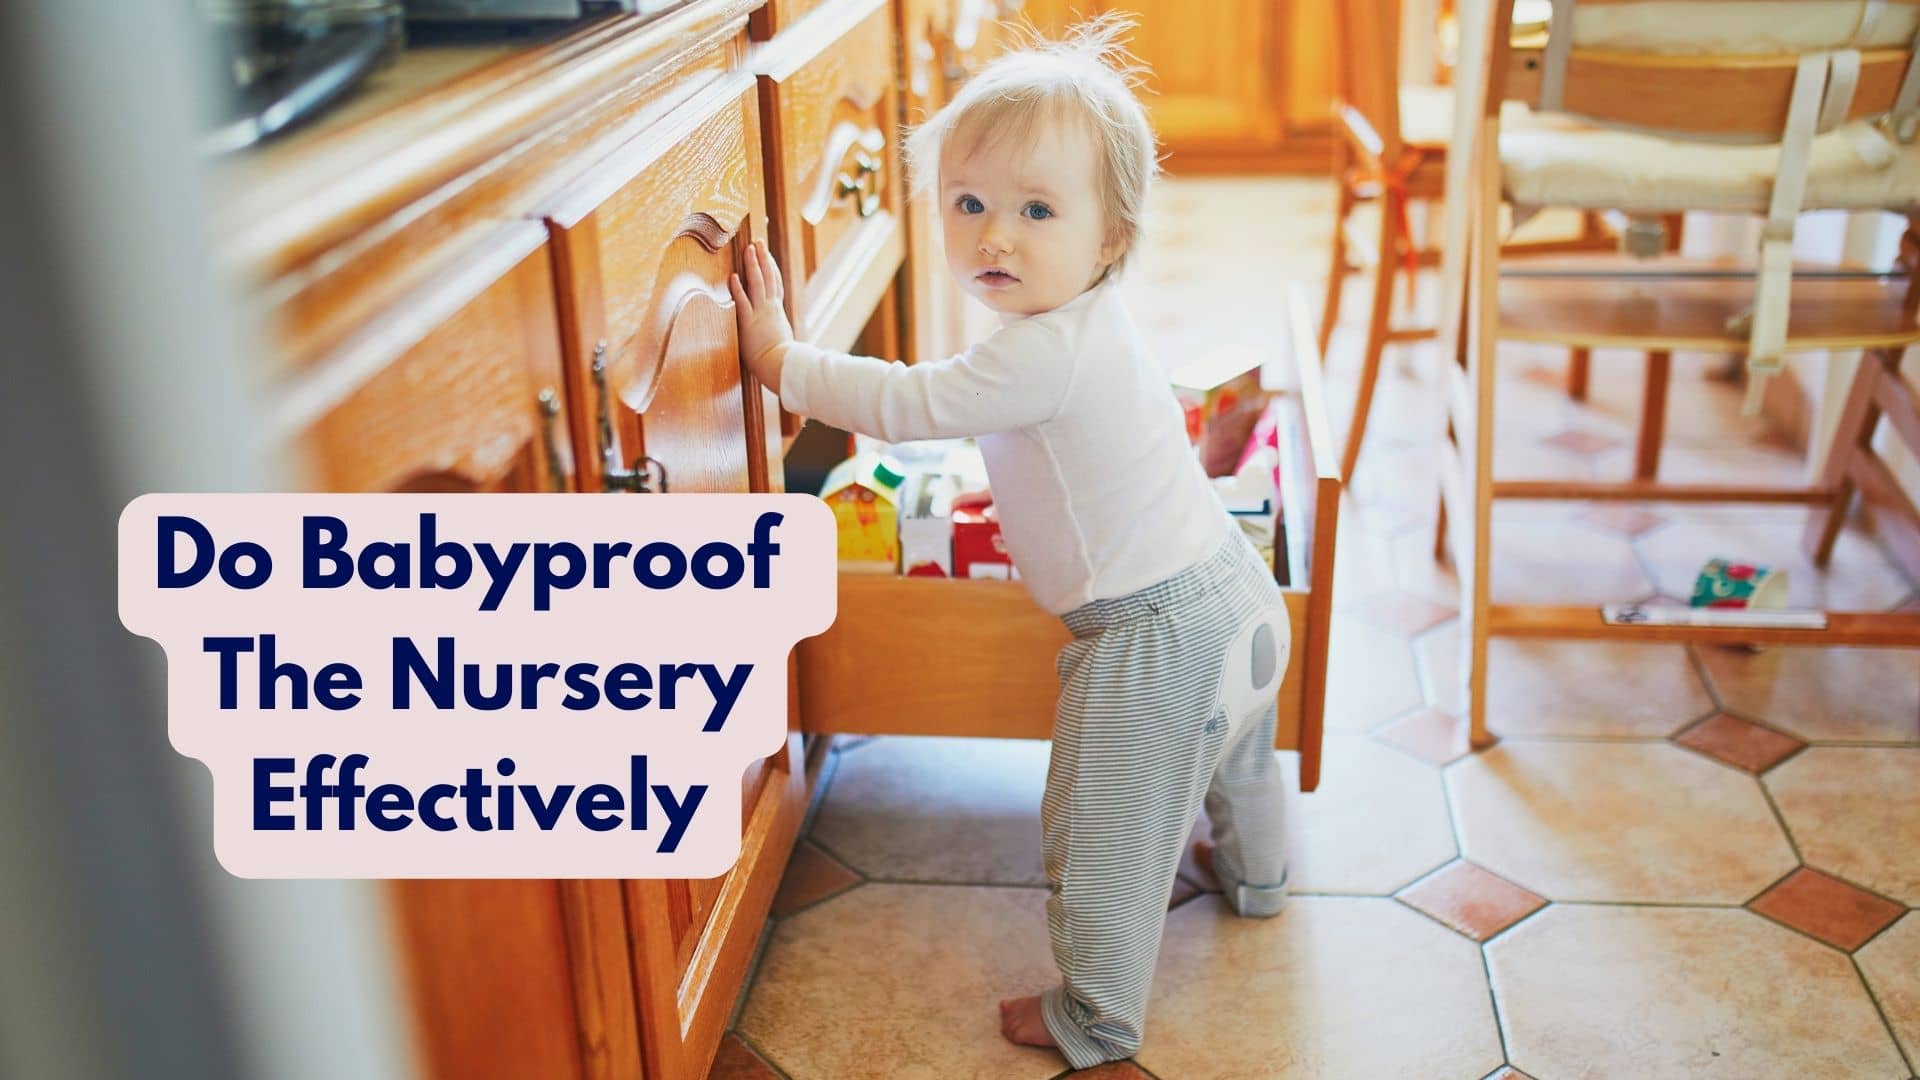 How To Babyproof The House Effectively?